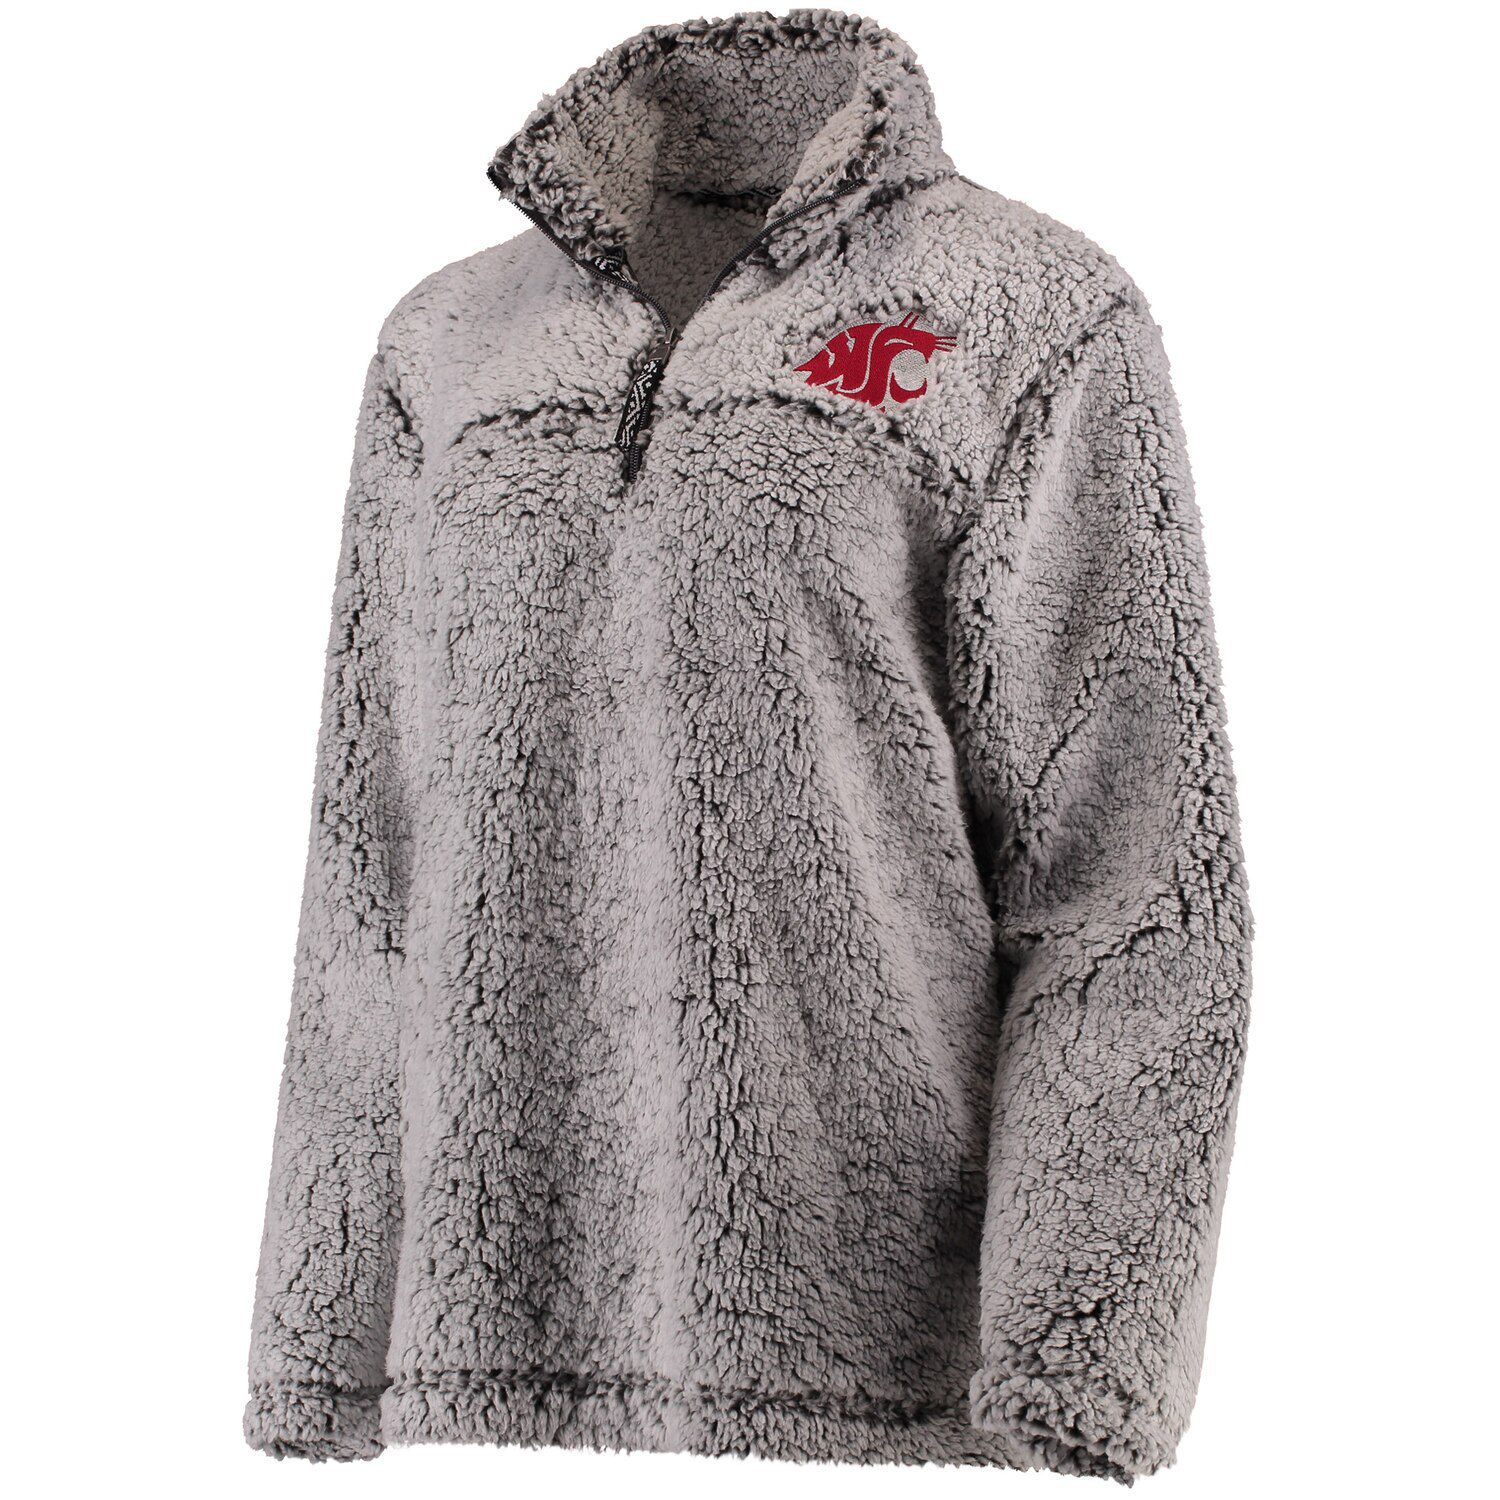 Image for Unbranded Women's Gray Washington State Cougars Sherpa Super Soft Quarter-Zip Pullover Jacket at Kohl's.